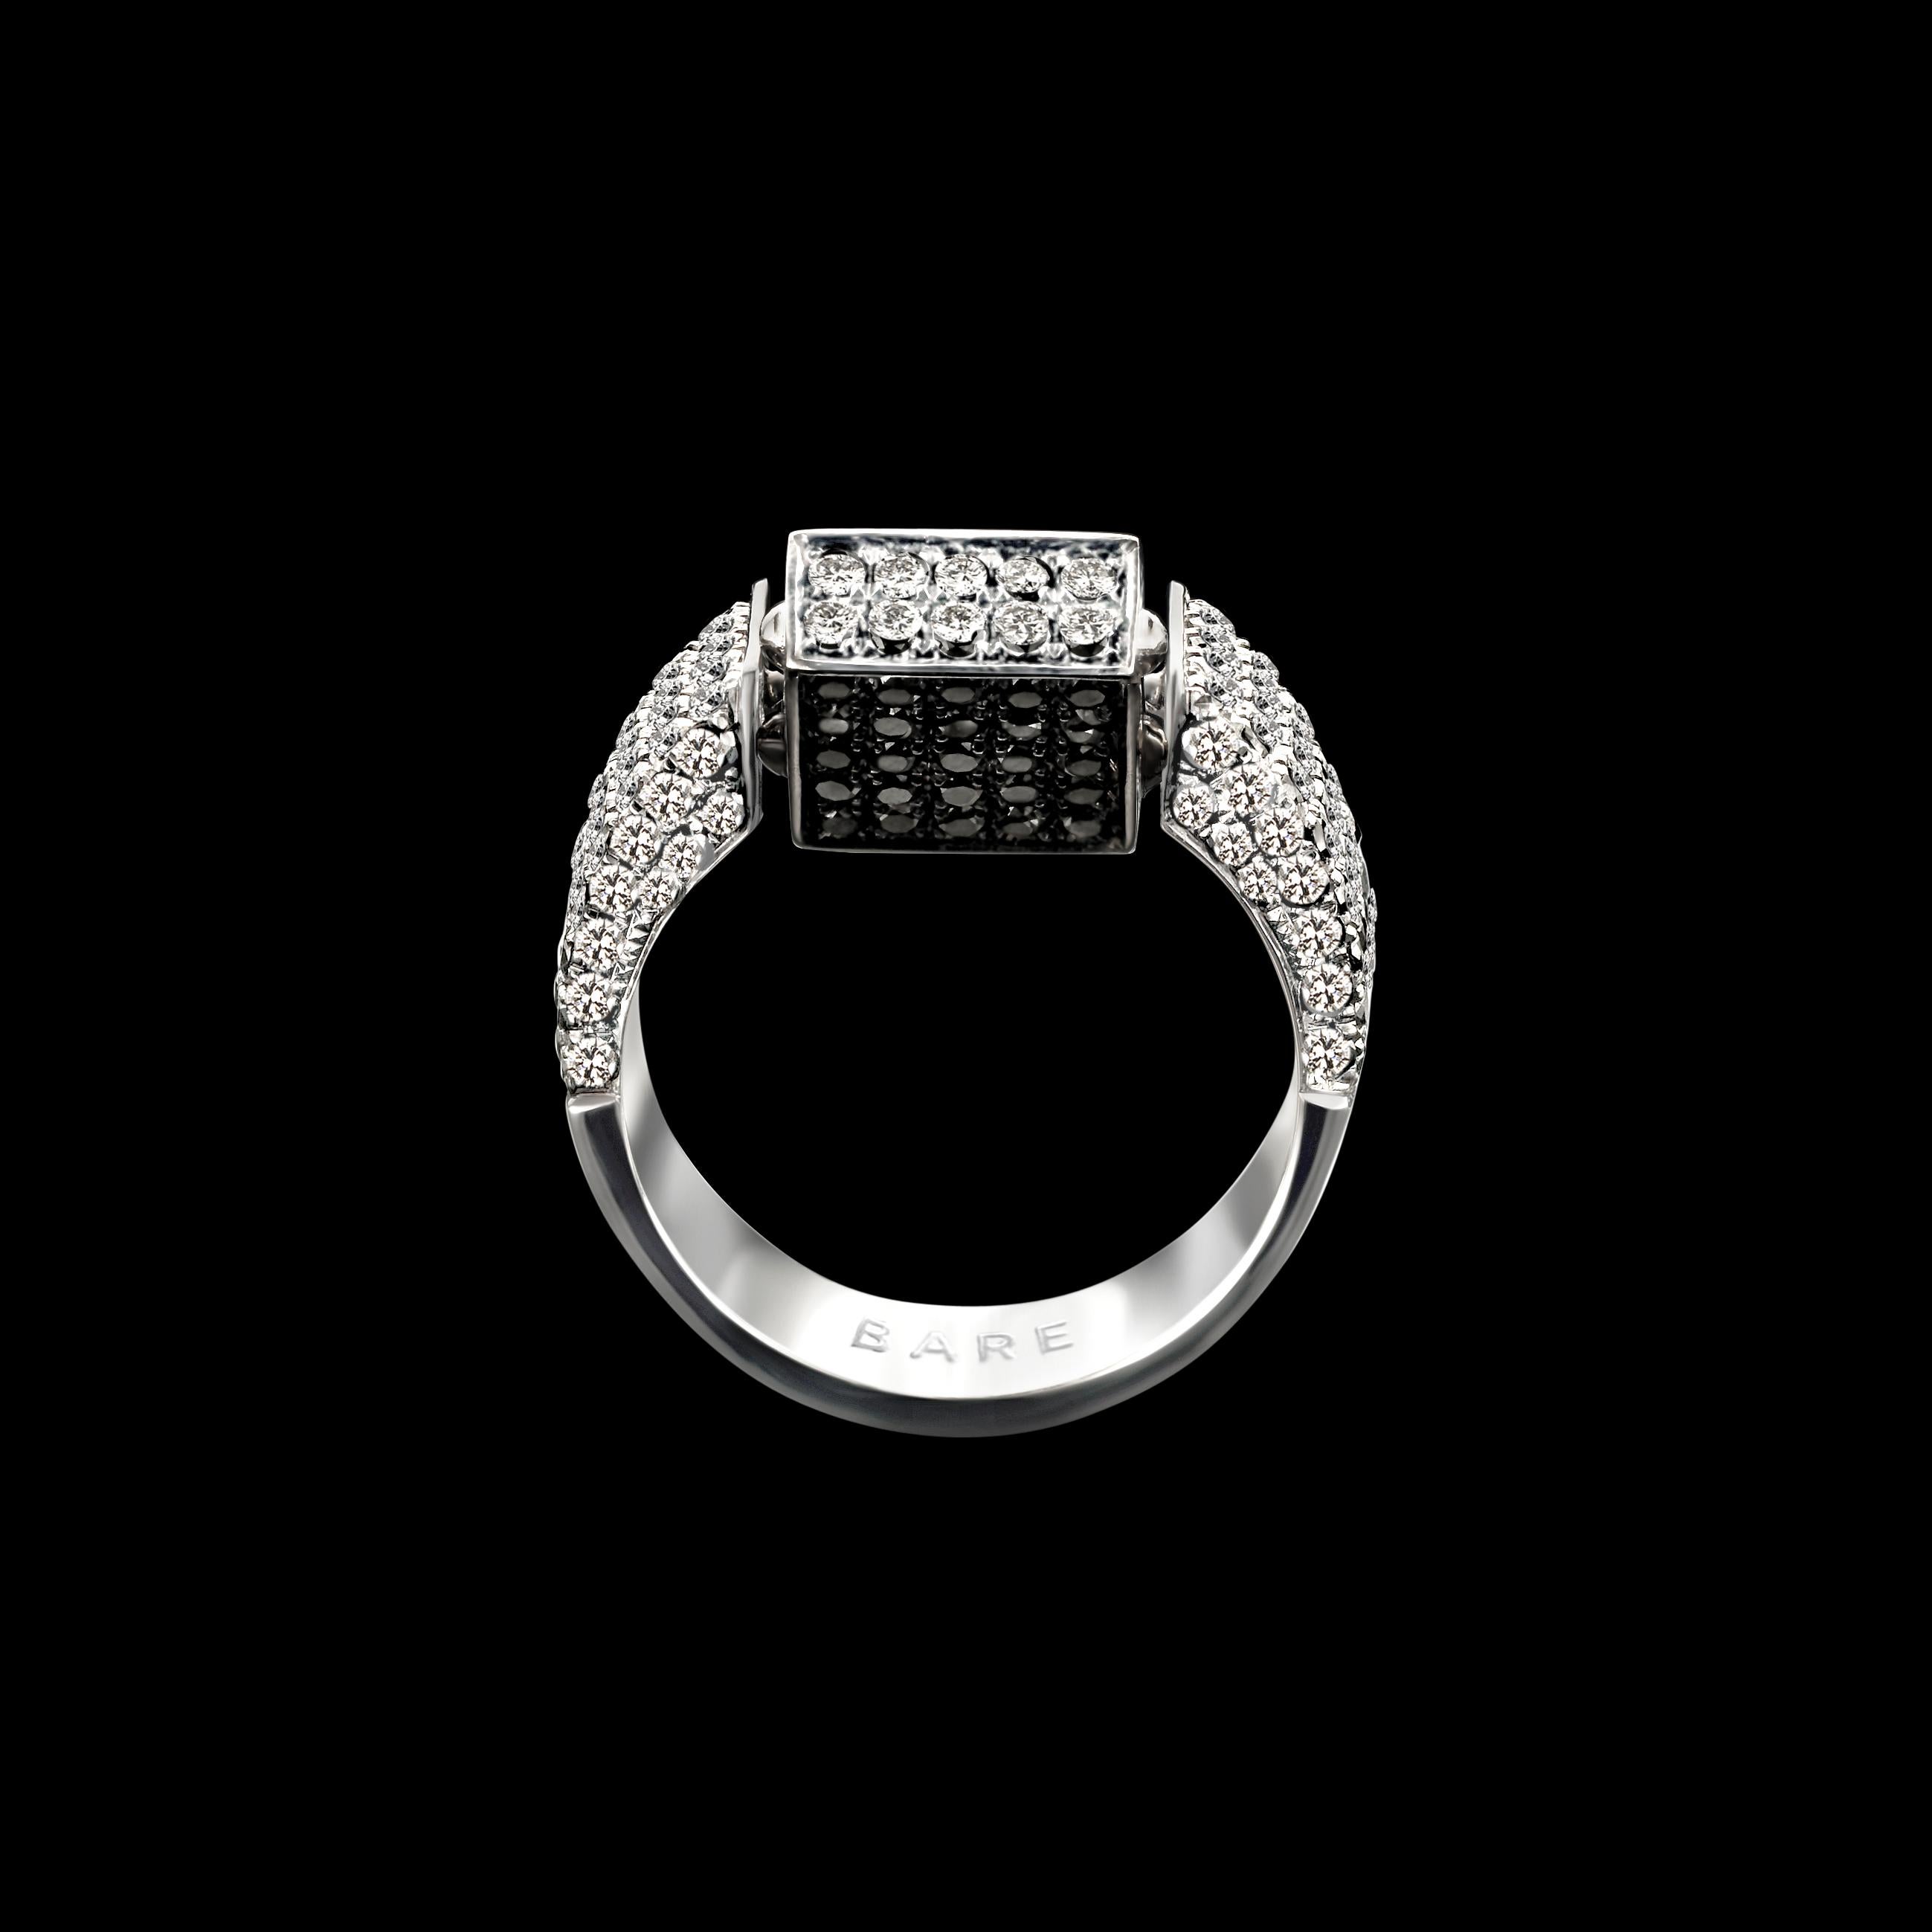 This square signet-inspired ring is expertly crafted by hand from 18-karat white gold, while the top and side are bedecked with an array of 2.95ct white and 0.32ct black diamonds.
Certified by International Gemological Institute Antwerp.
This ring